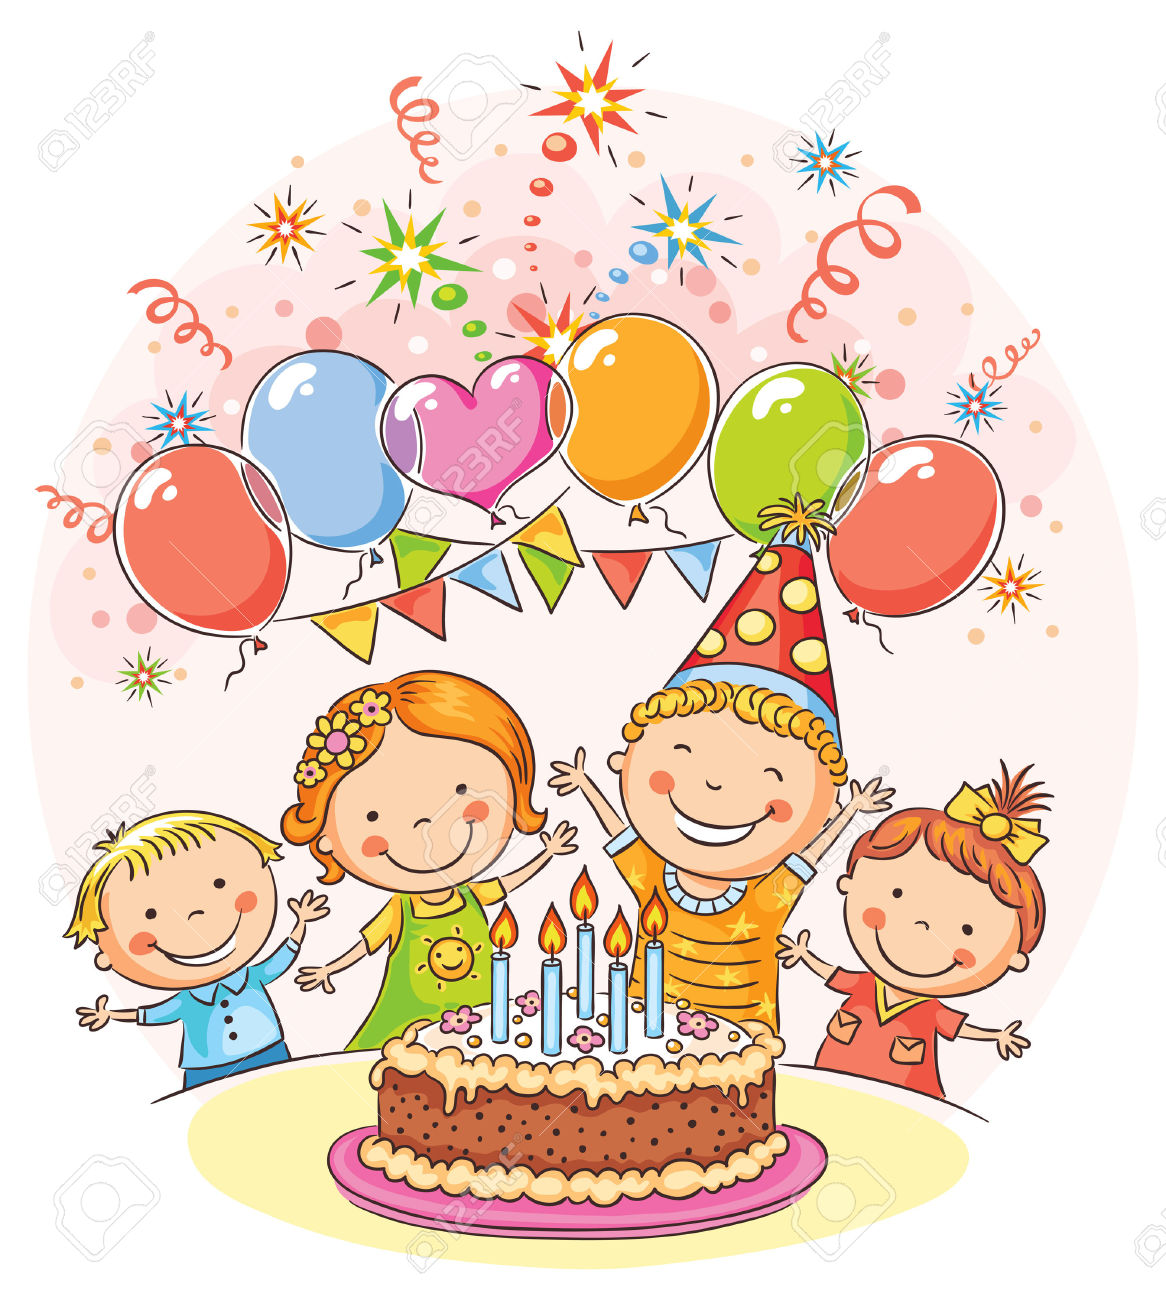 birthday clipart for kids - Clip Art Library